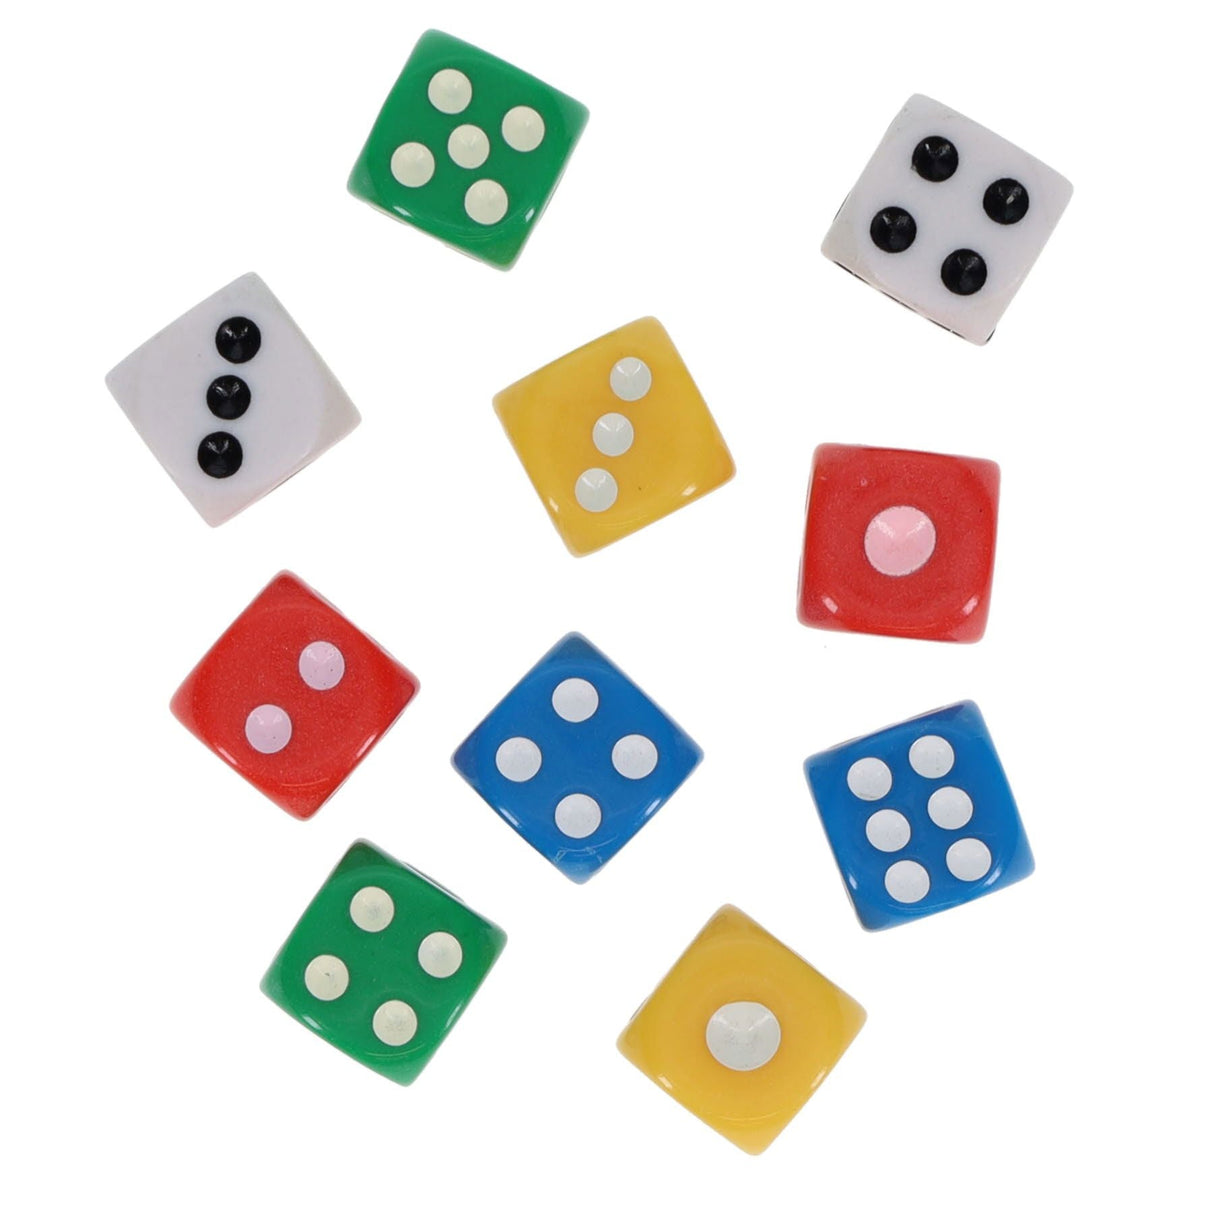 Clever Kidz Dice 5 Assorted - Pack of 10 | Stationery Shop UK